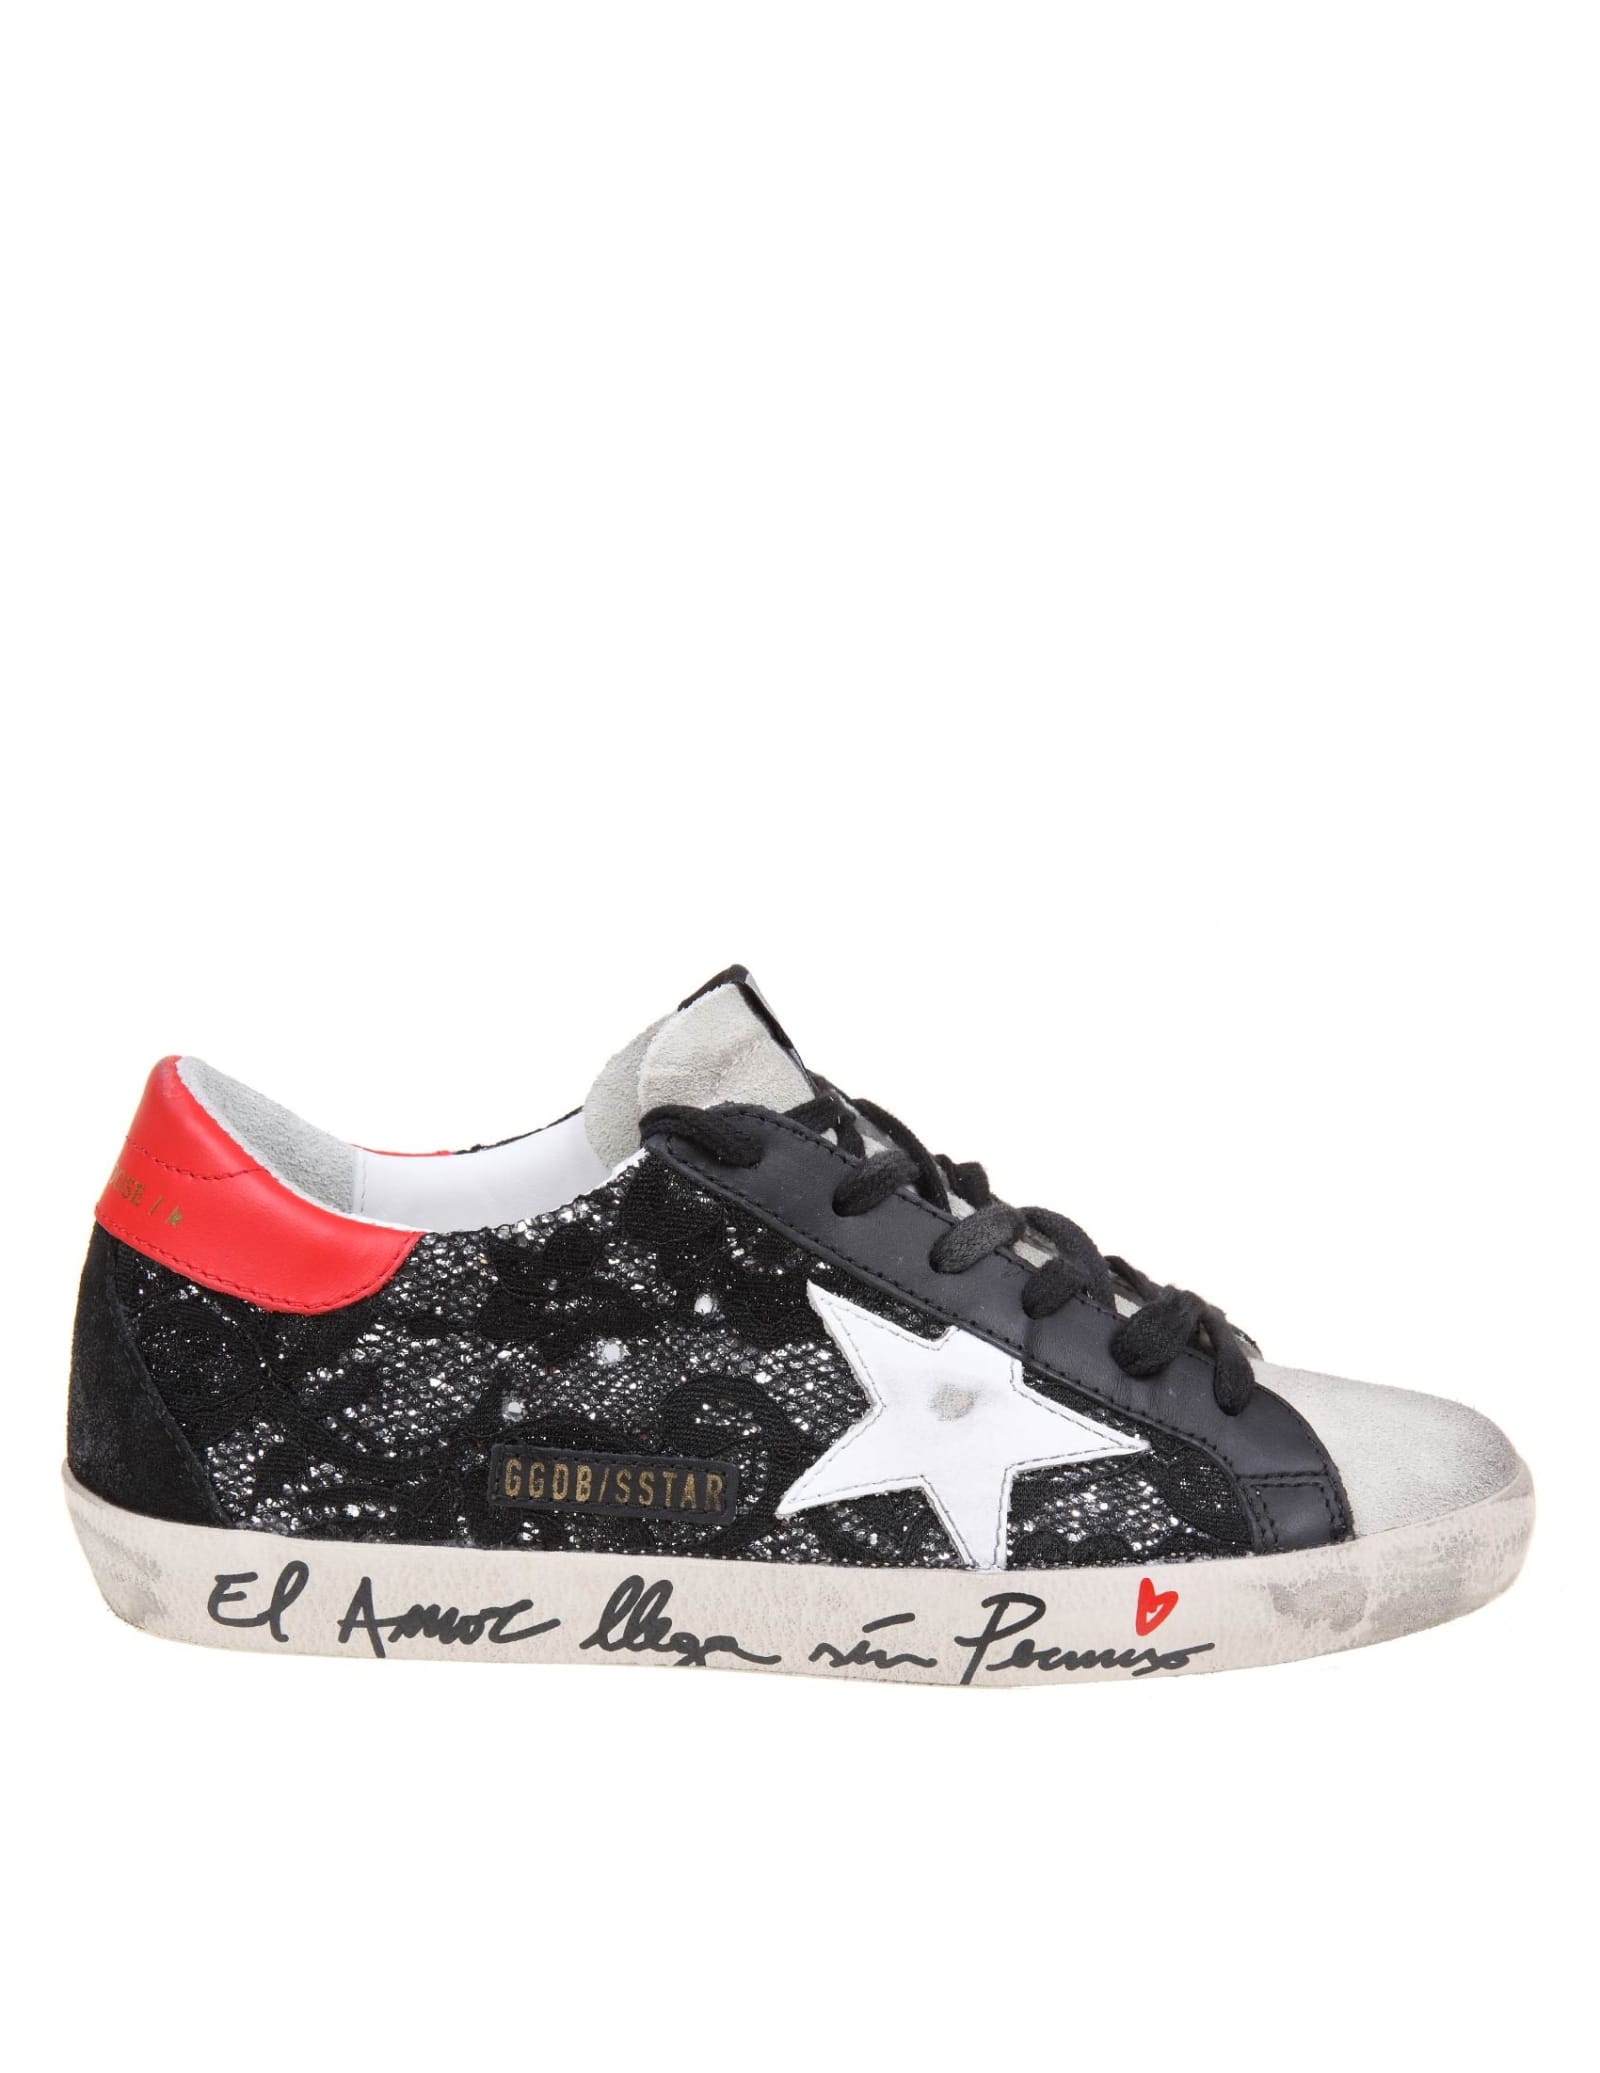 Buy Golden Goose Super Star Sneakers With Embroidery online, shop Golden Goose shoes with free shipping